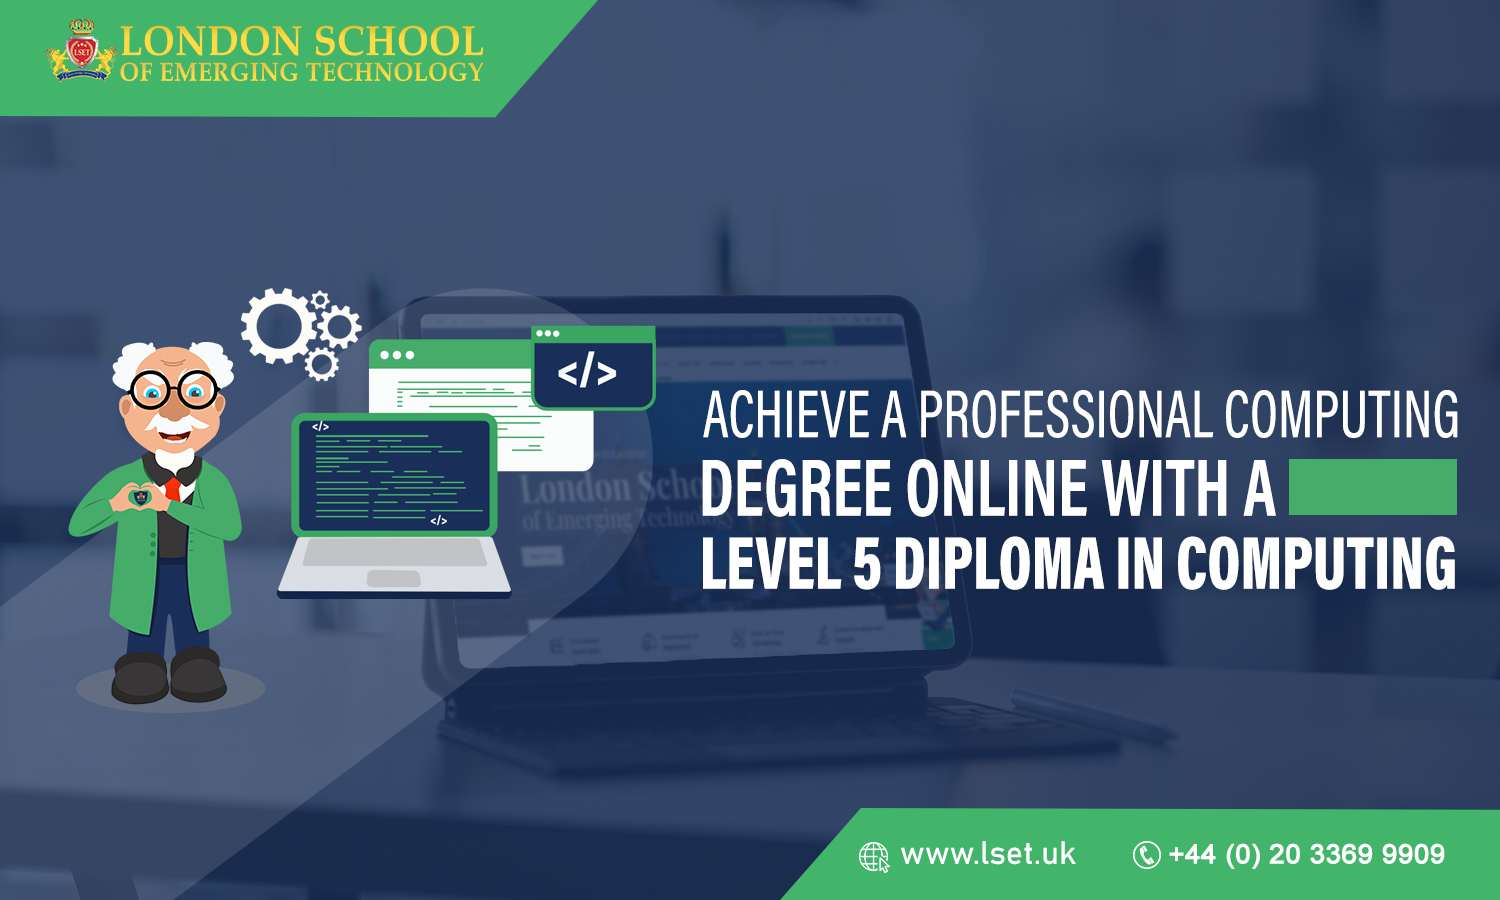 Achieve a Professional Computing Degree Online with a Level 5 Diploma in Computing